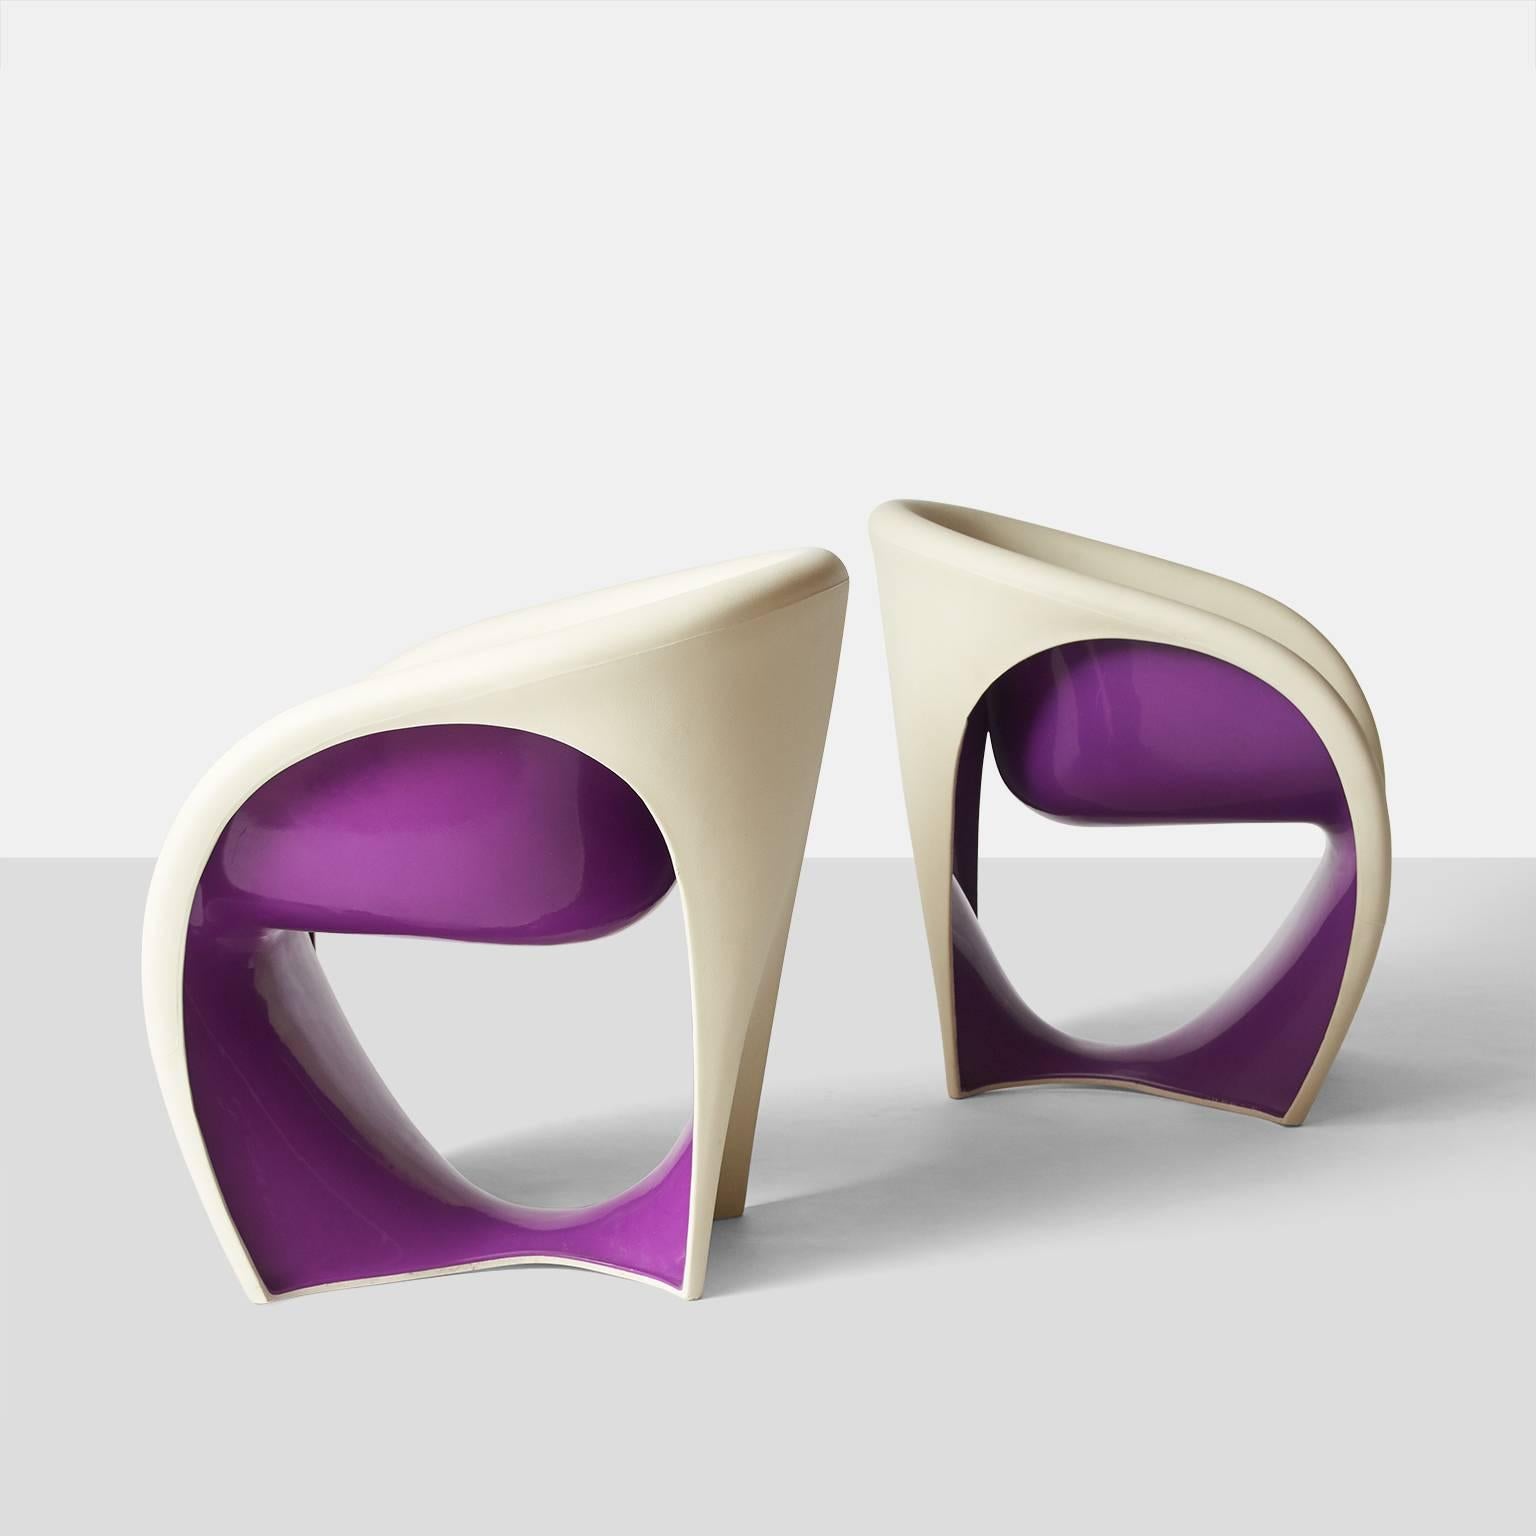 A pair of MT-1 lounge chairs by Ron Arad for Driade. Each is made of rotational molded polyethylene with white exterior color and deep purple underside. Manufacturer's stamp on base.